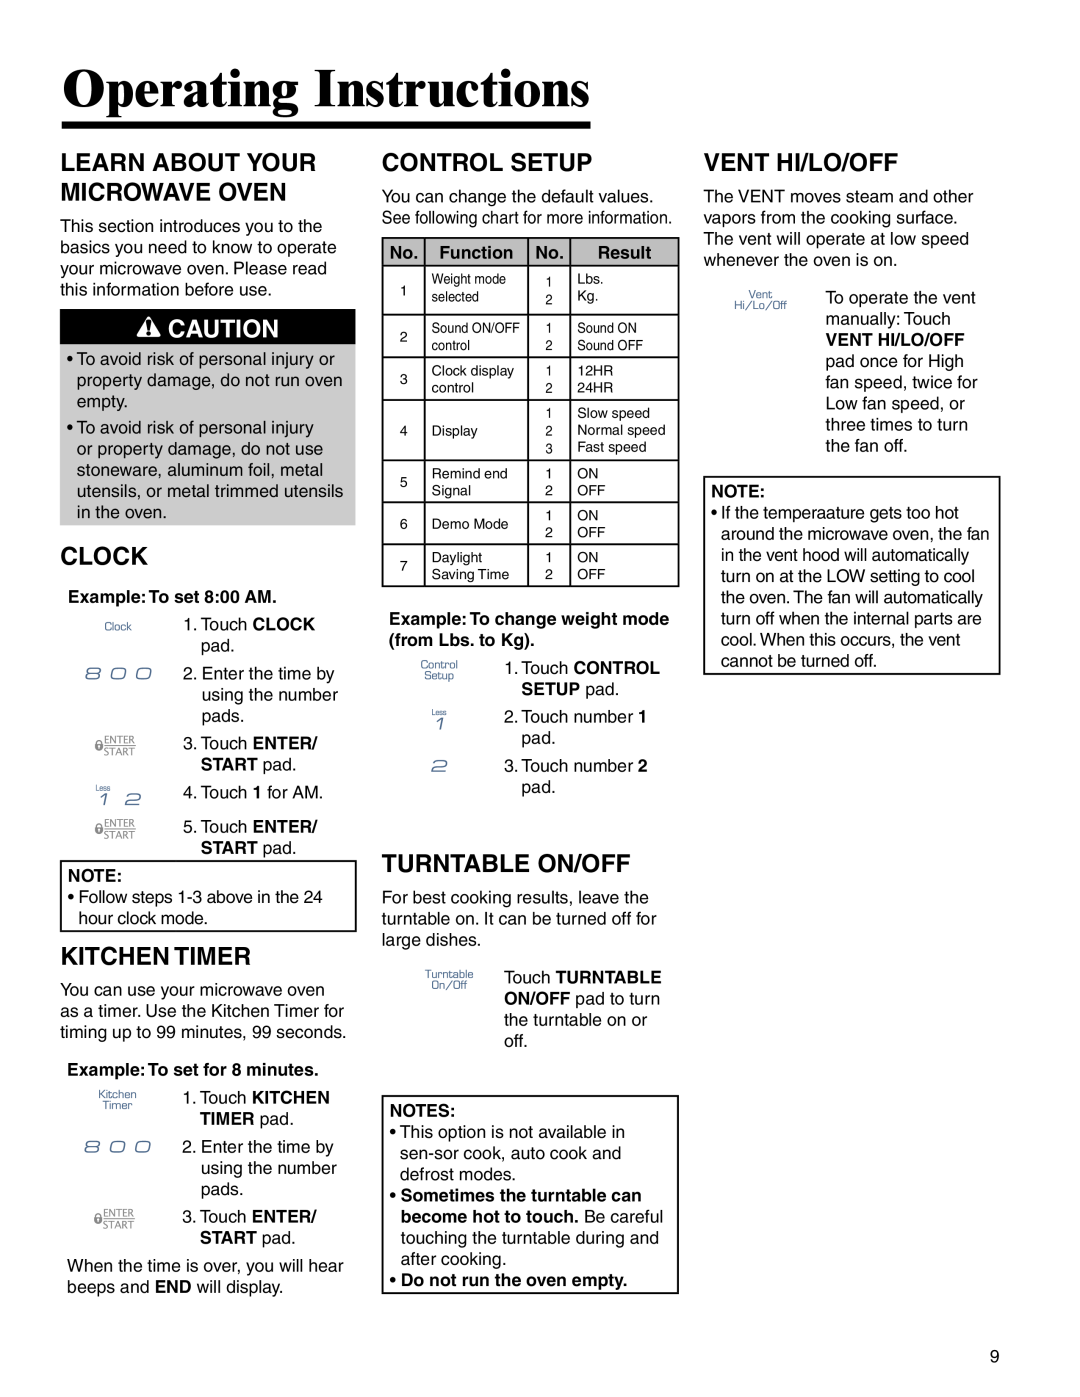 Maytag MMV4205BA Operating Instructions, Learn About Your Microwave Oven, Clock, Kitchen Timer, Control Setup 